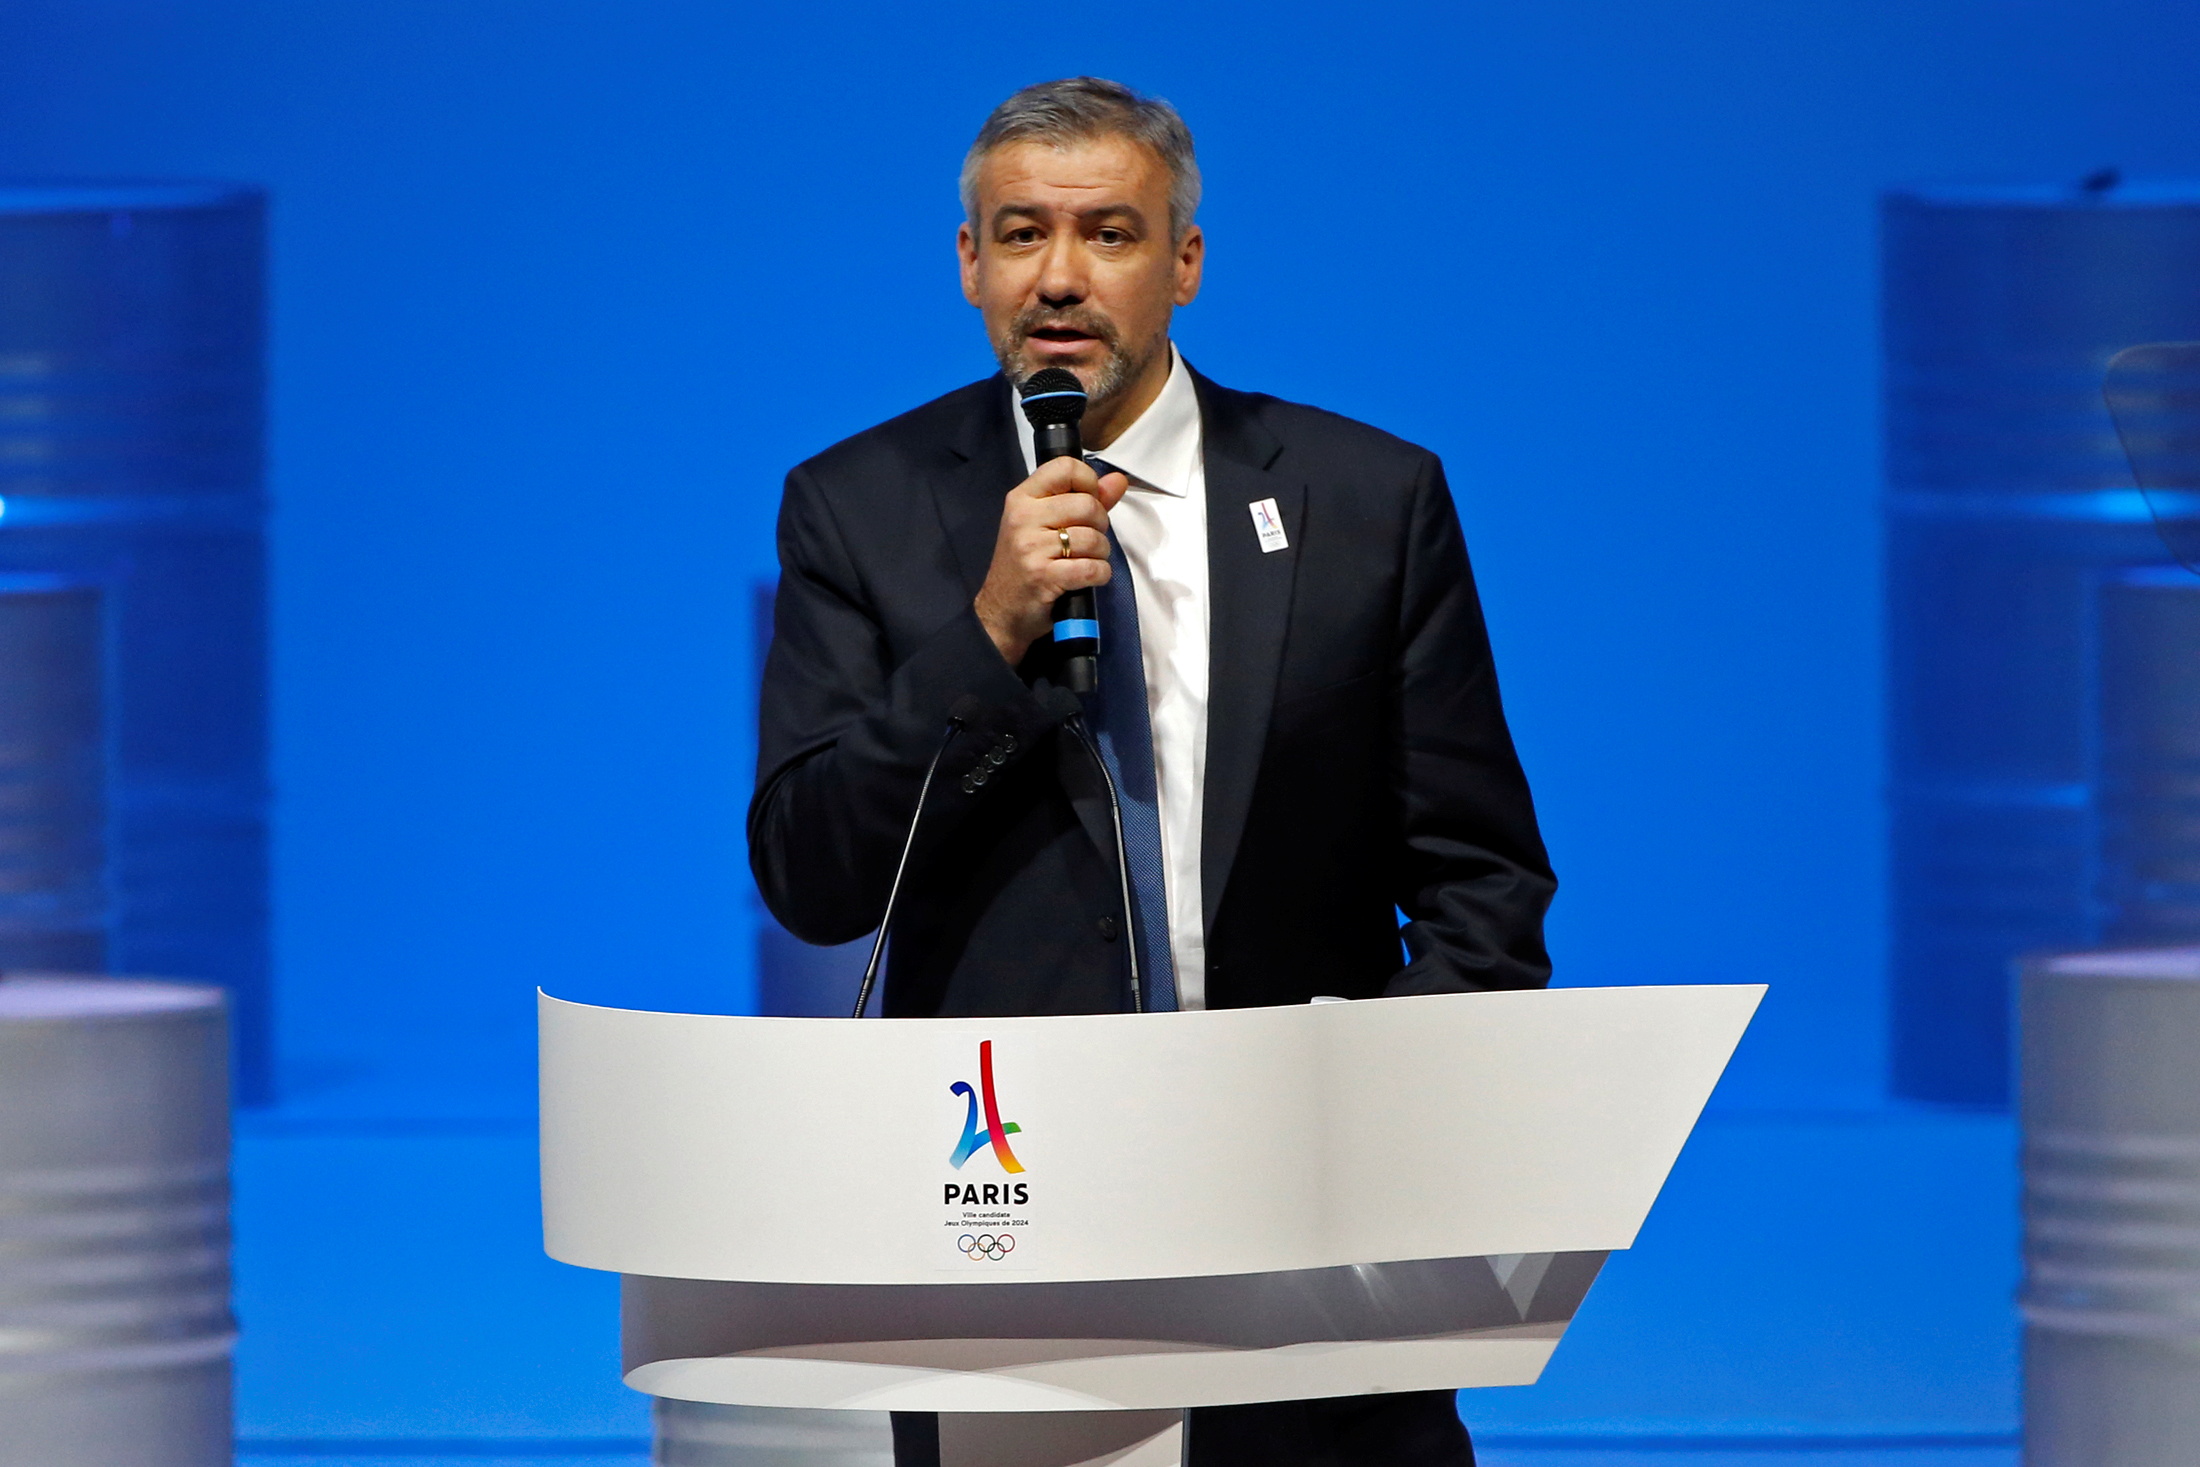  Etienne Thobois, Chief Executive of the Paris 2024 Bid Committee, attends the presentation of the Paris candidacy for the 2024 Olympic and Paralympic Games in Paris, France, February 17, 2016. 